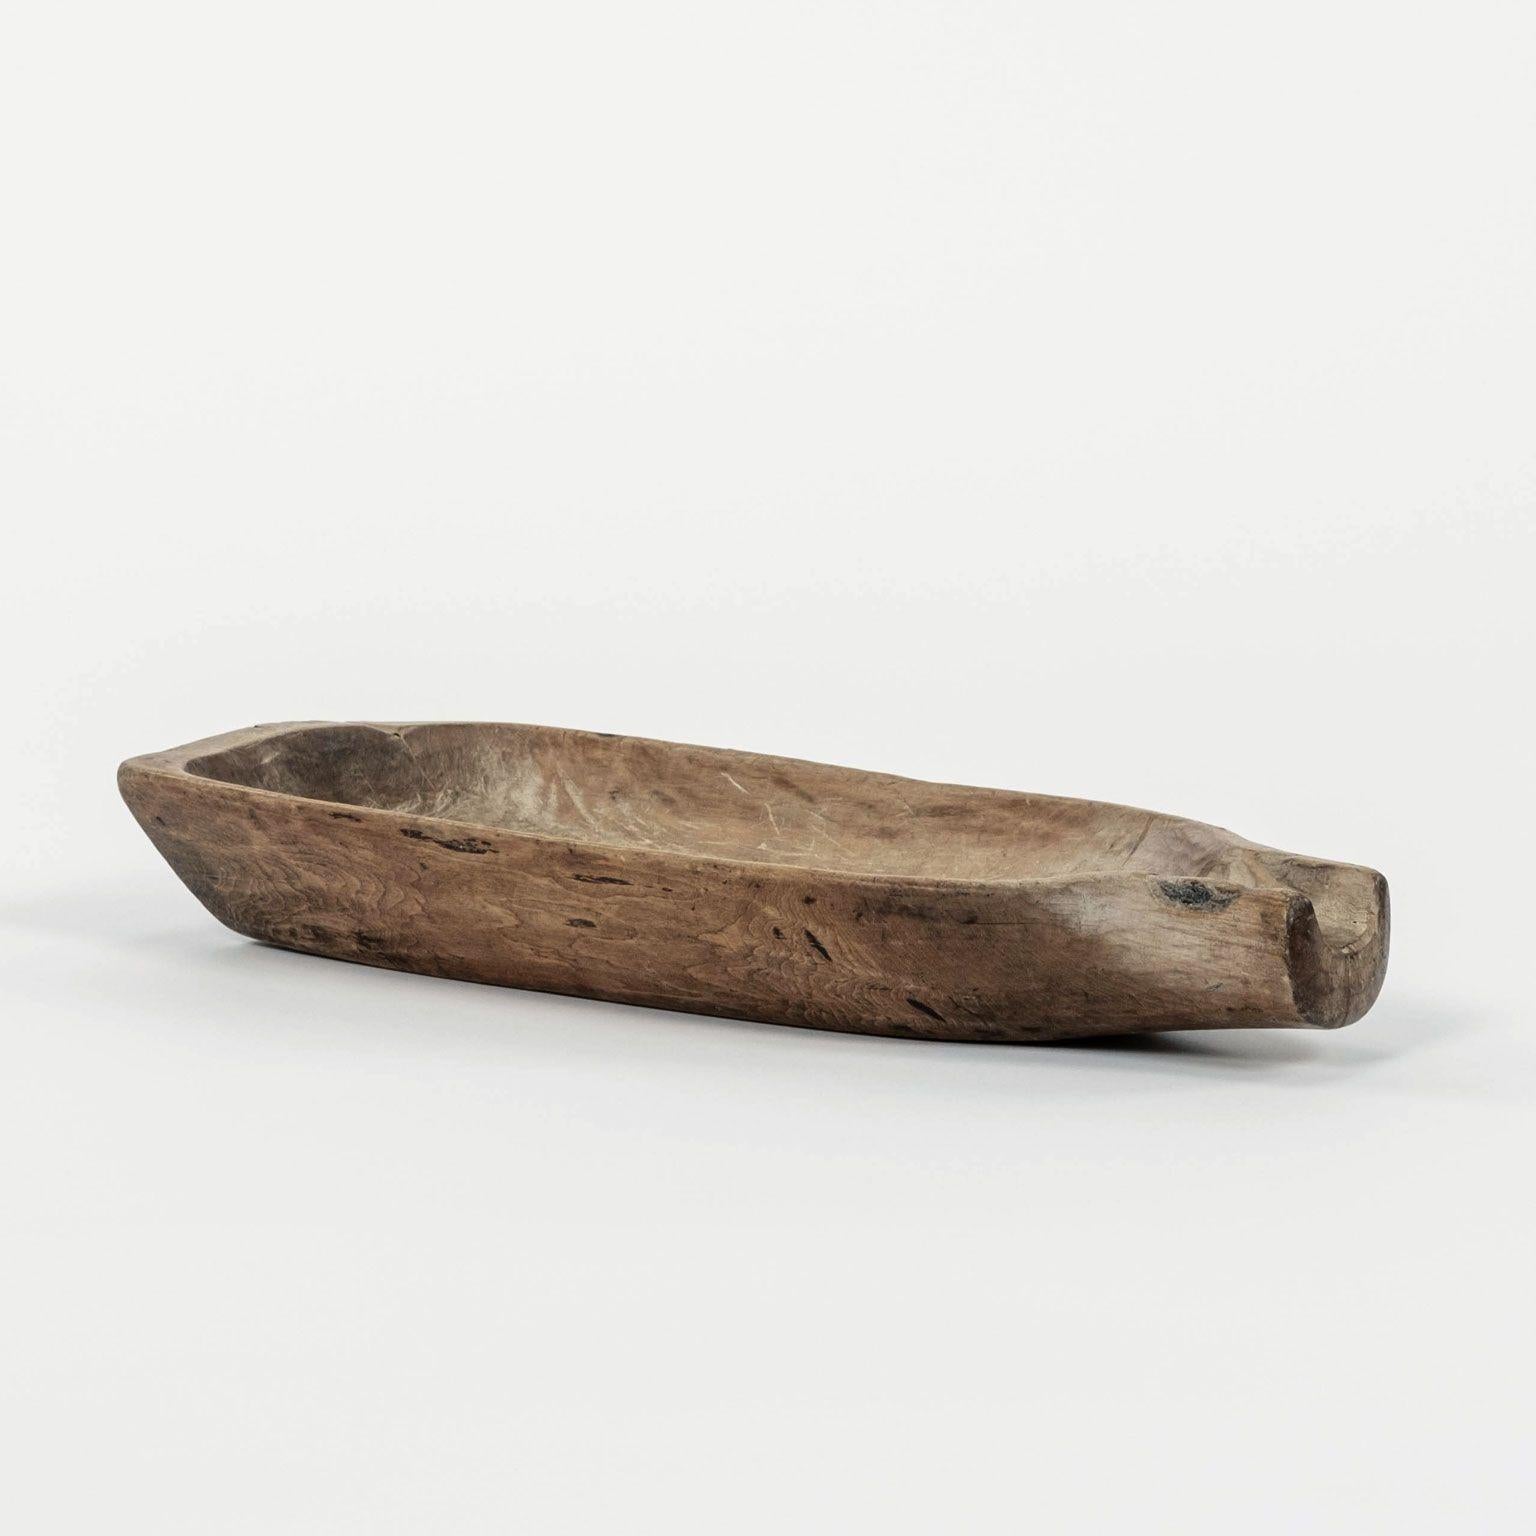 Rustic Swedish spouted salting trough hand-carved from bleached wood, dated 1855. Runic characters inscribed upon underside.

Note: Due to regional changes in humidity and climate during shipping, antique wood may shrink and/or split along its